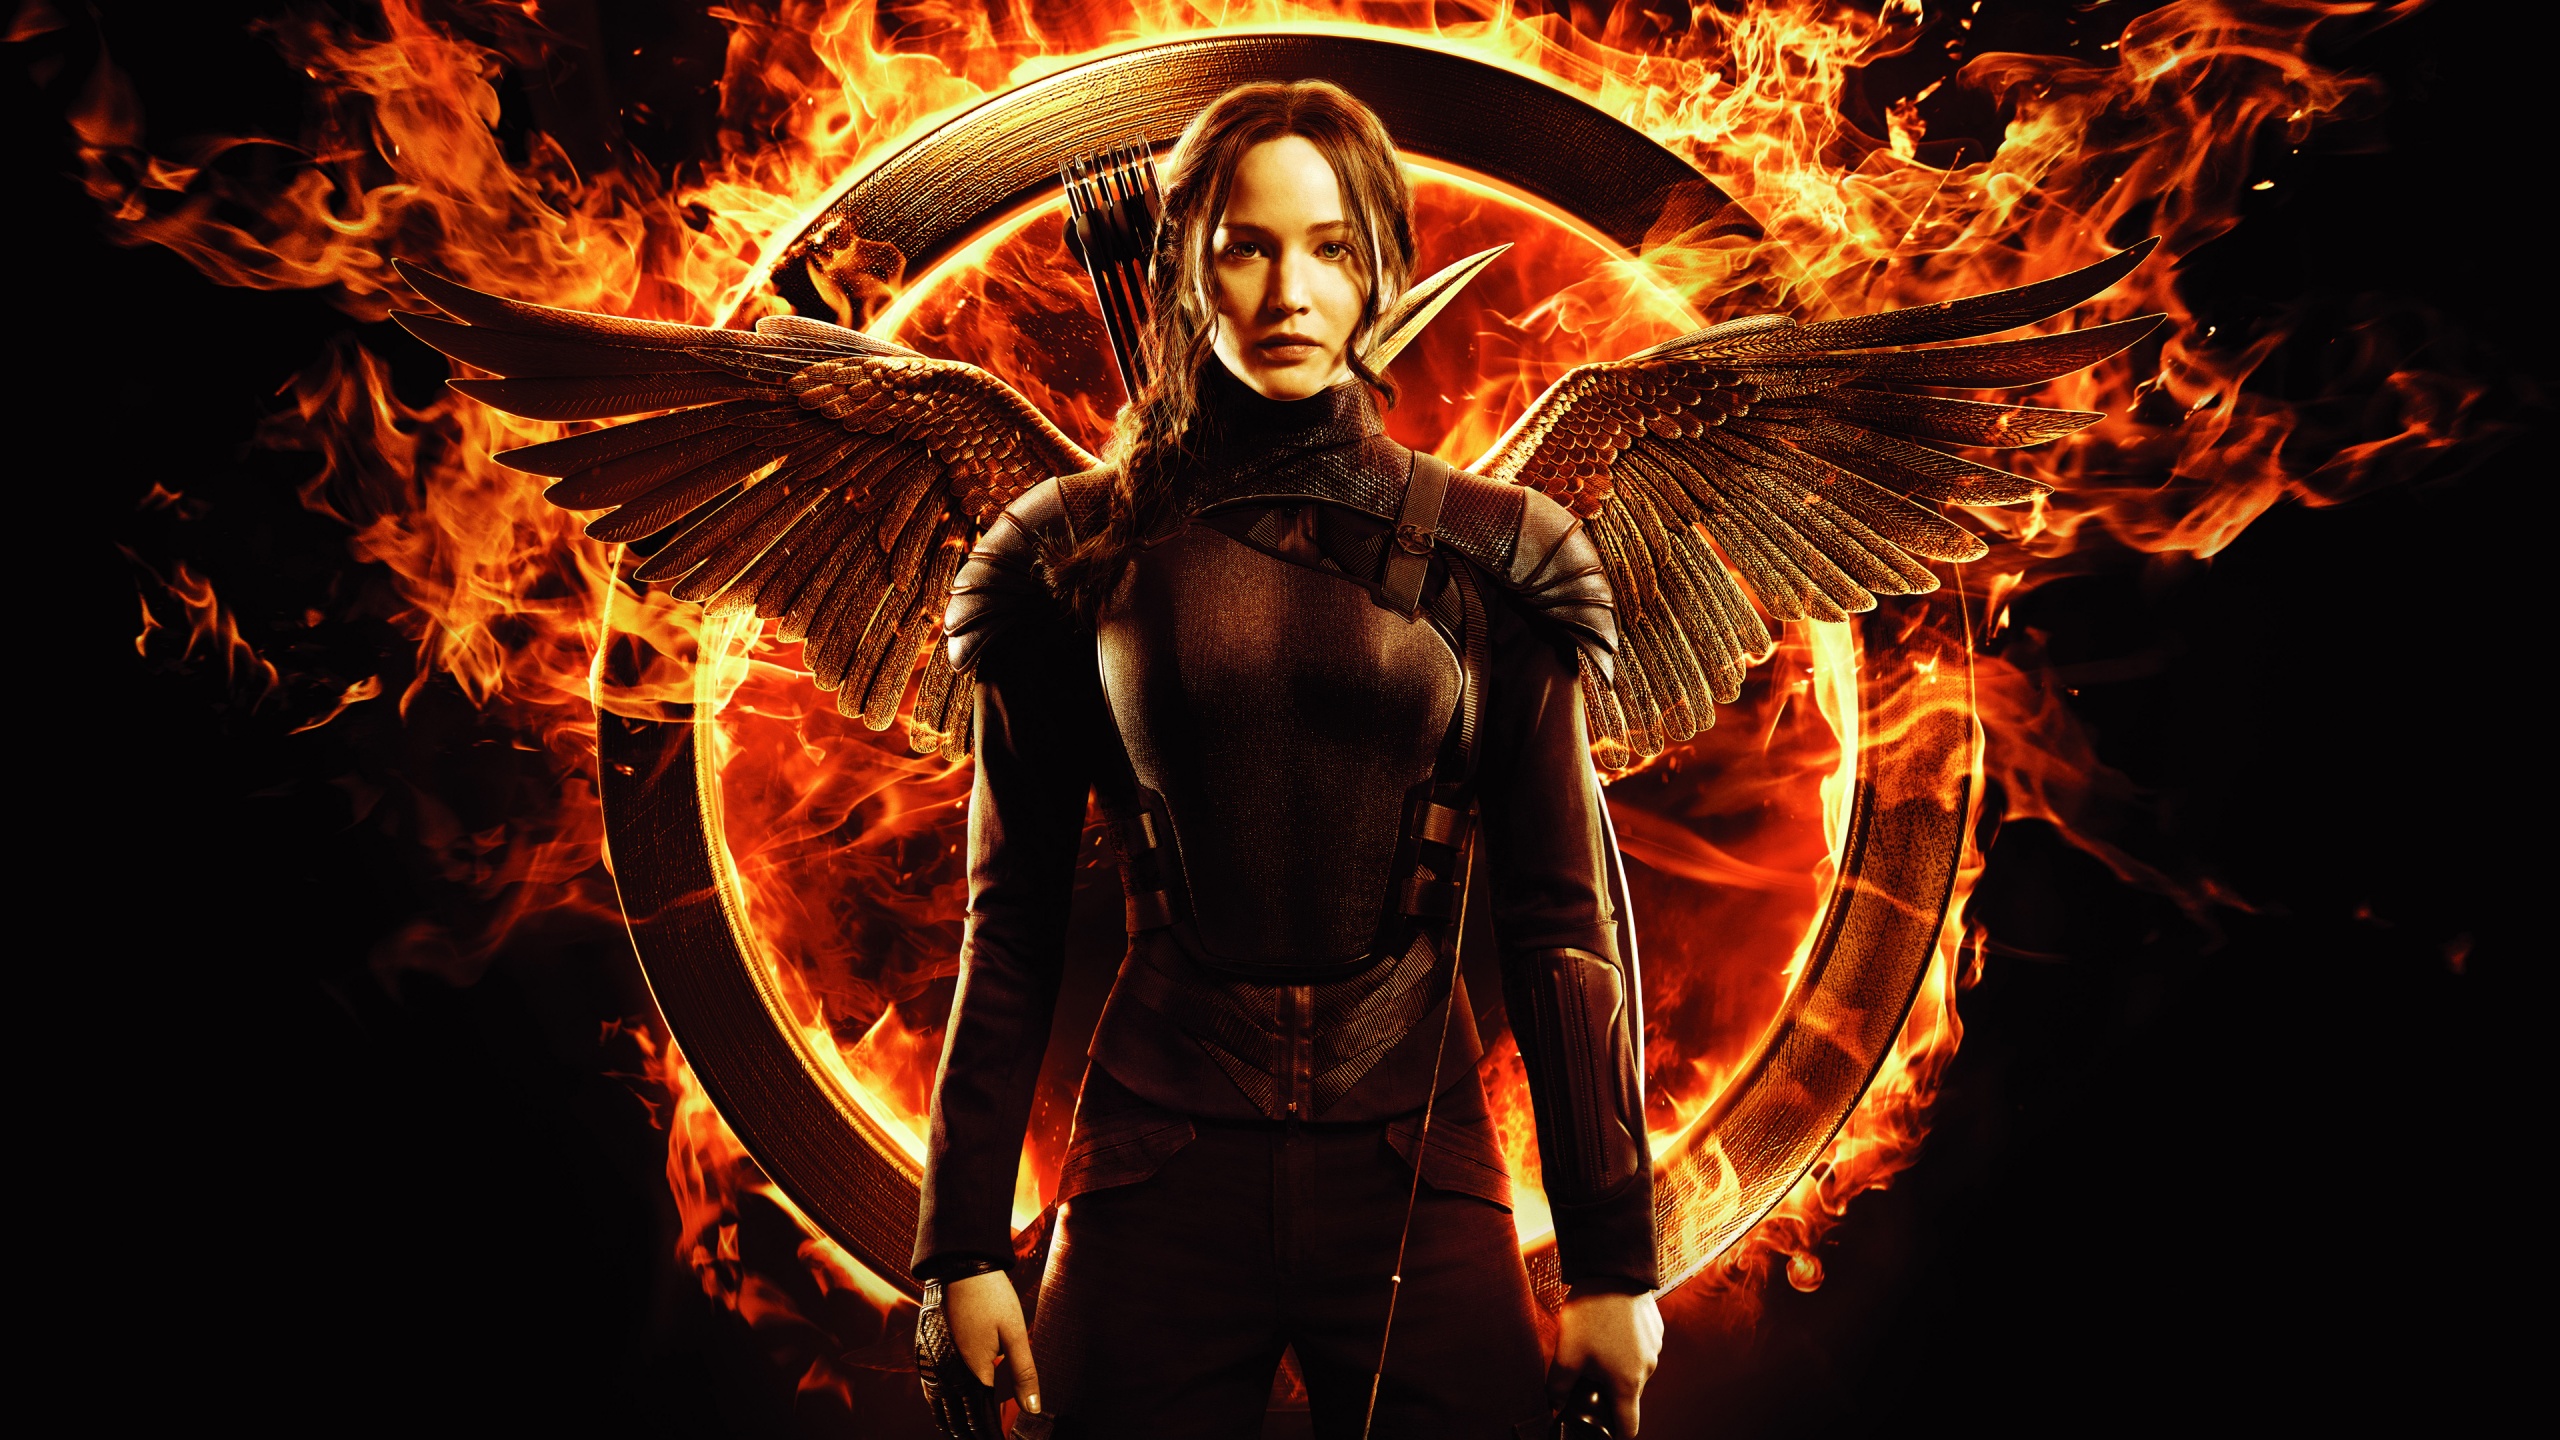  Lawrence in Hunger Games Mockingjay Wallpapers HD Wallpapers 2560x1440